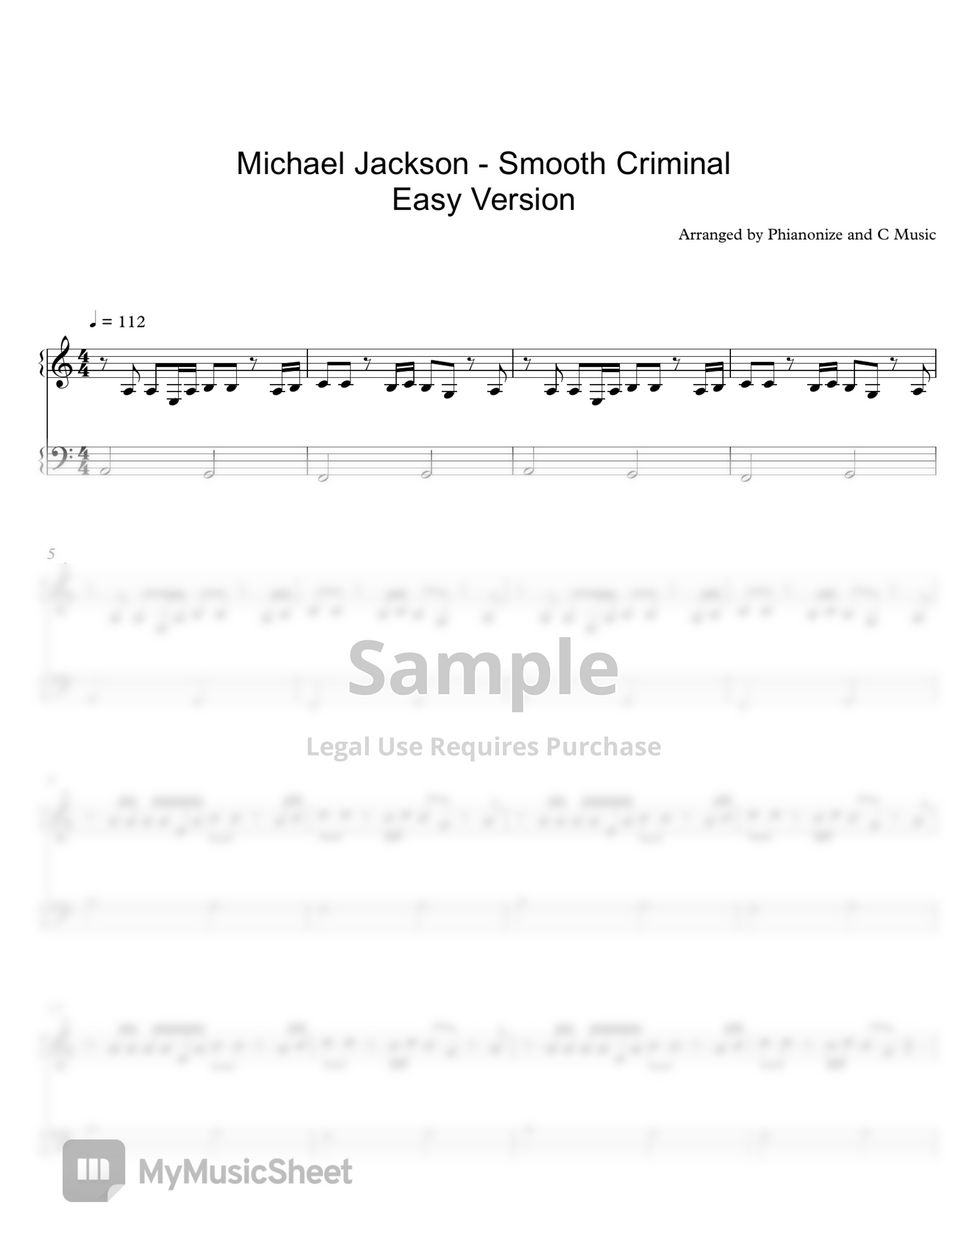 Michael Jackson Smooth Criminal Sheets By Phianonize And C Music